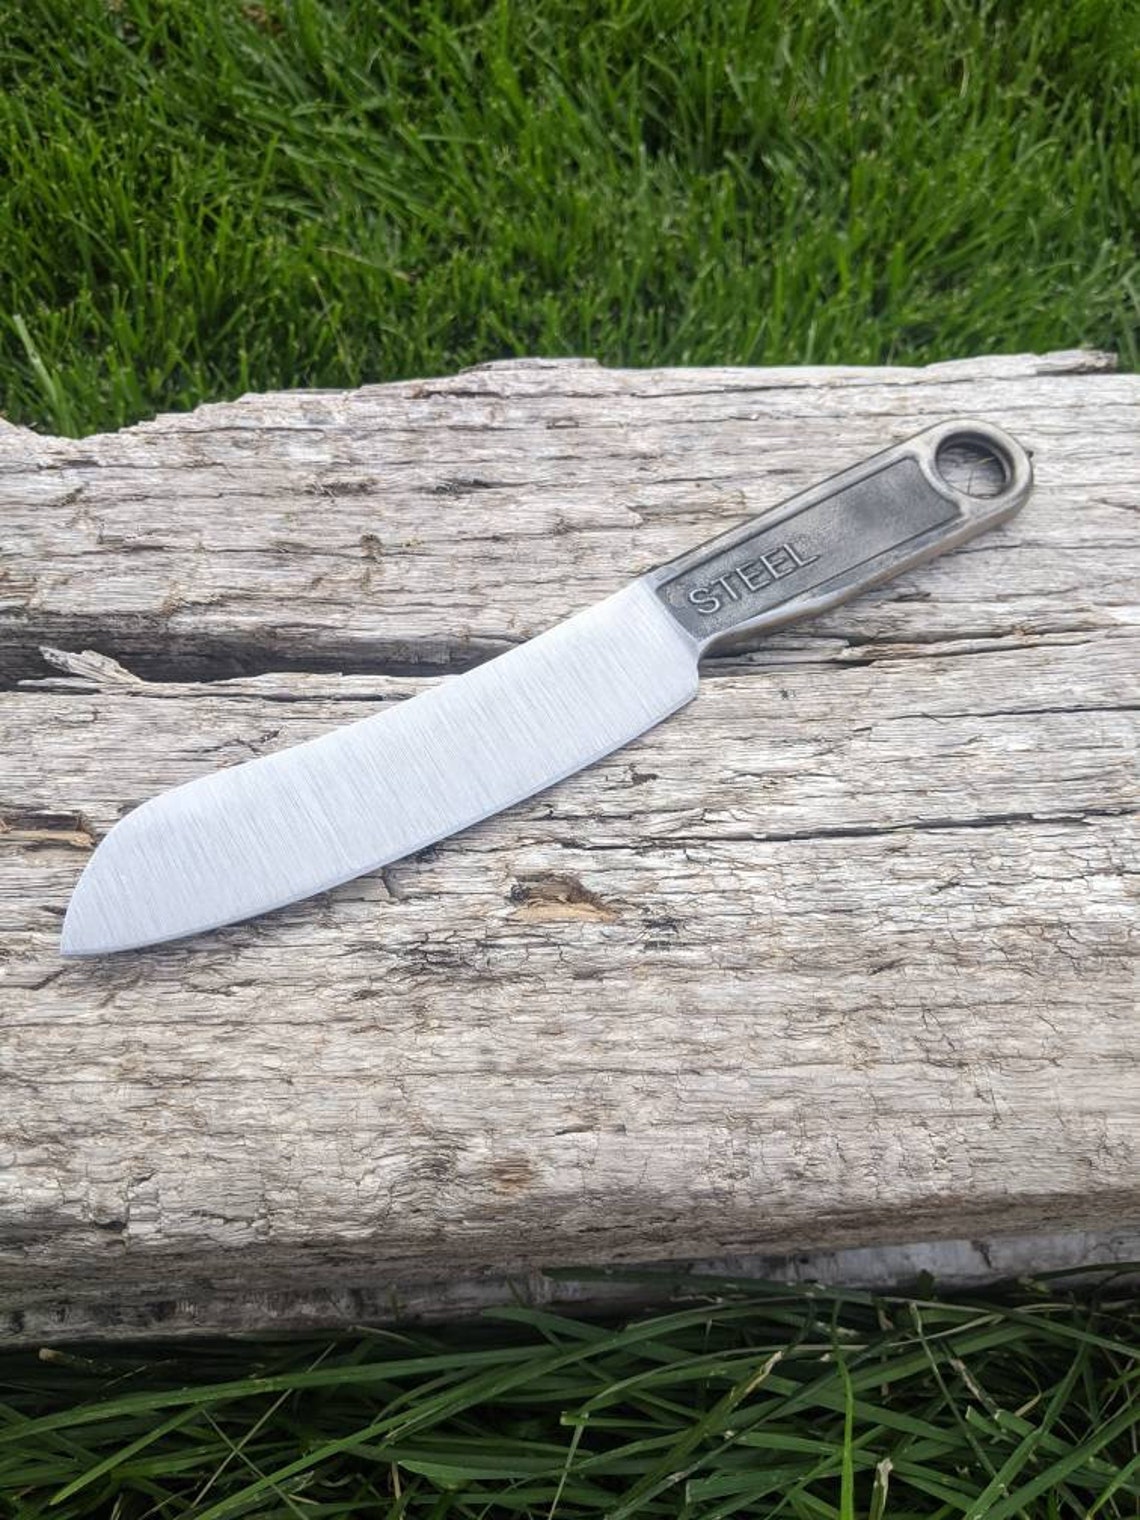 Sheepsfoot Blade Wrench Knife Hand Forged 10 | Etsy